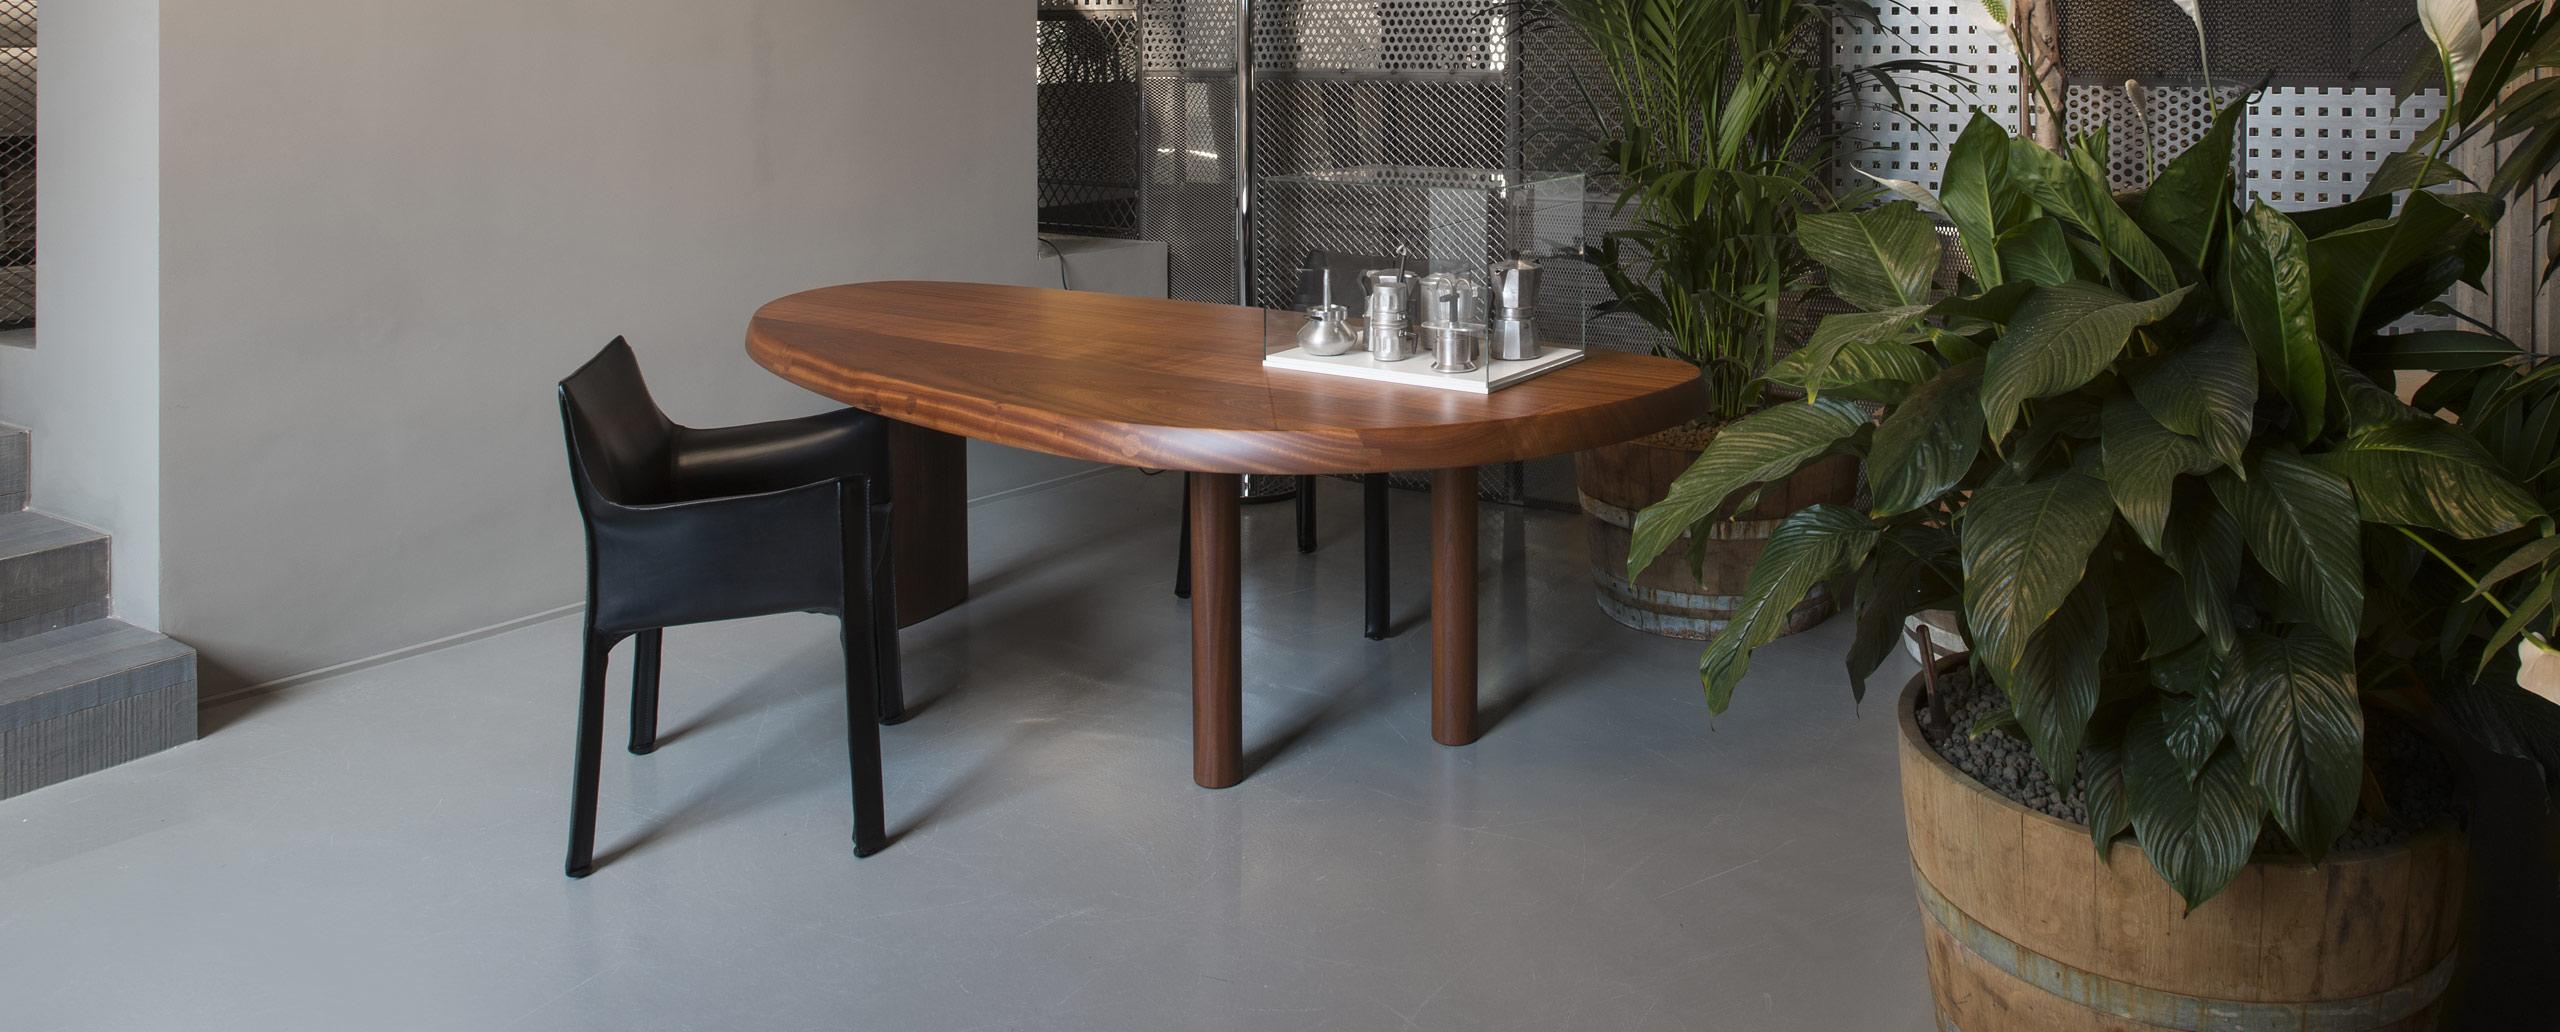 table forme libre charlotte perriand